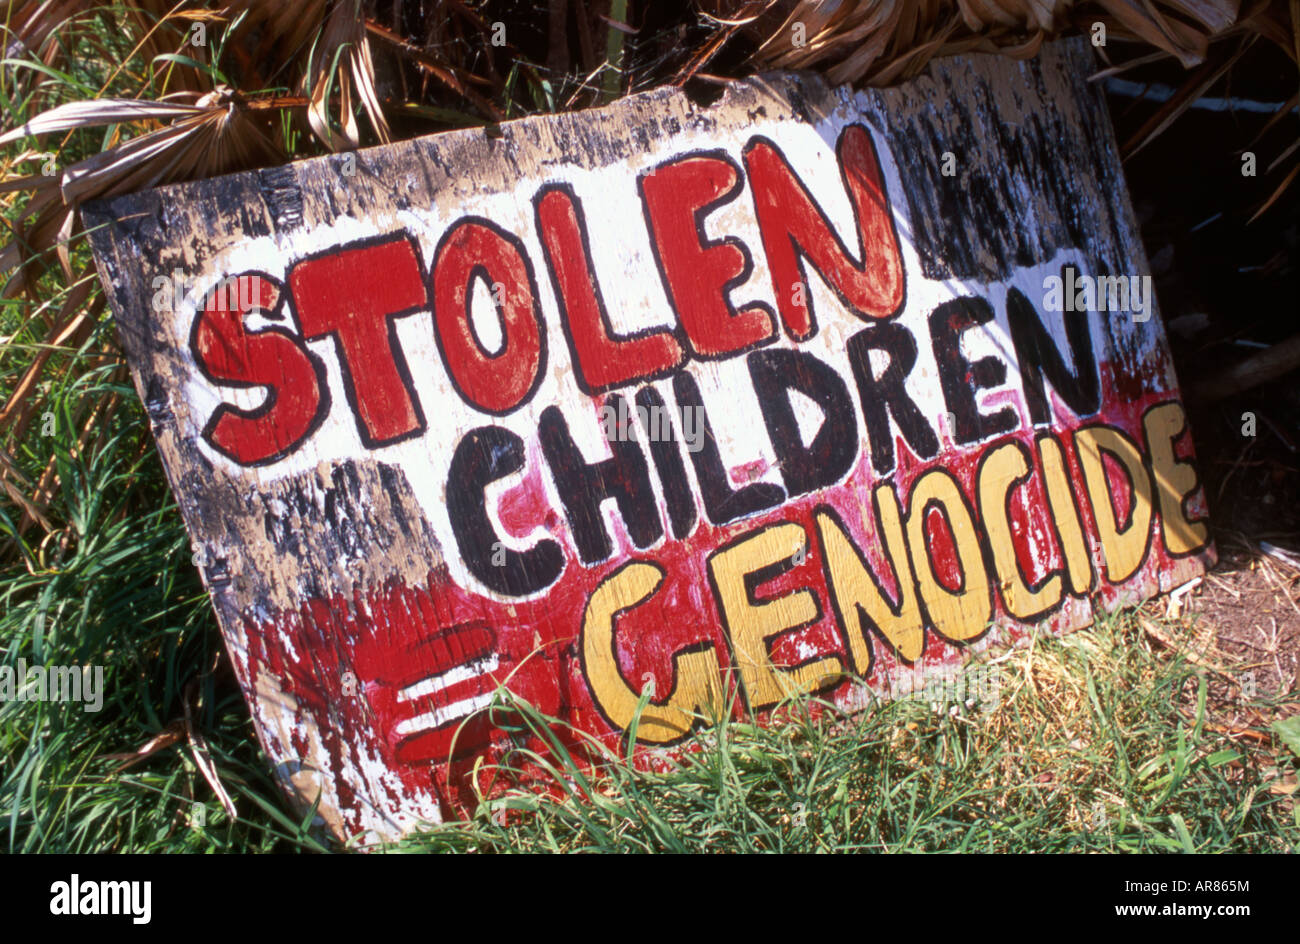 Aboriginal protest sign referring to the 'Lost Generation' outside Old Parliament House in Canberra, Australia Stock Photo